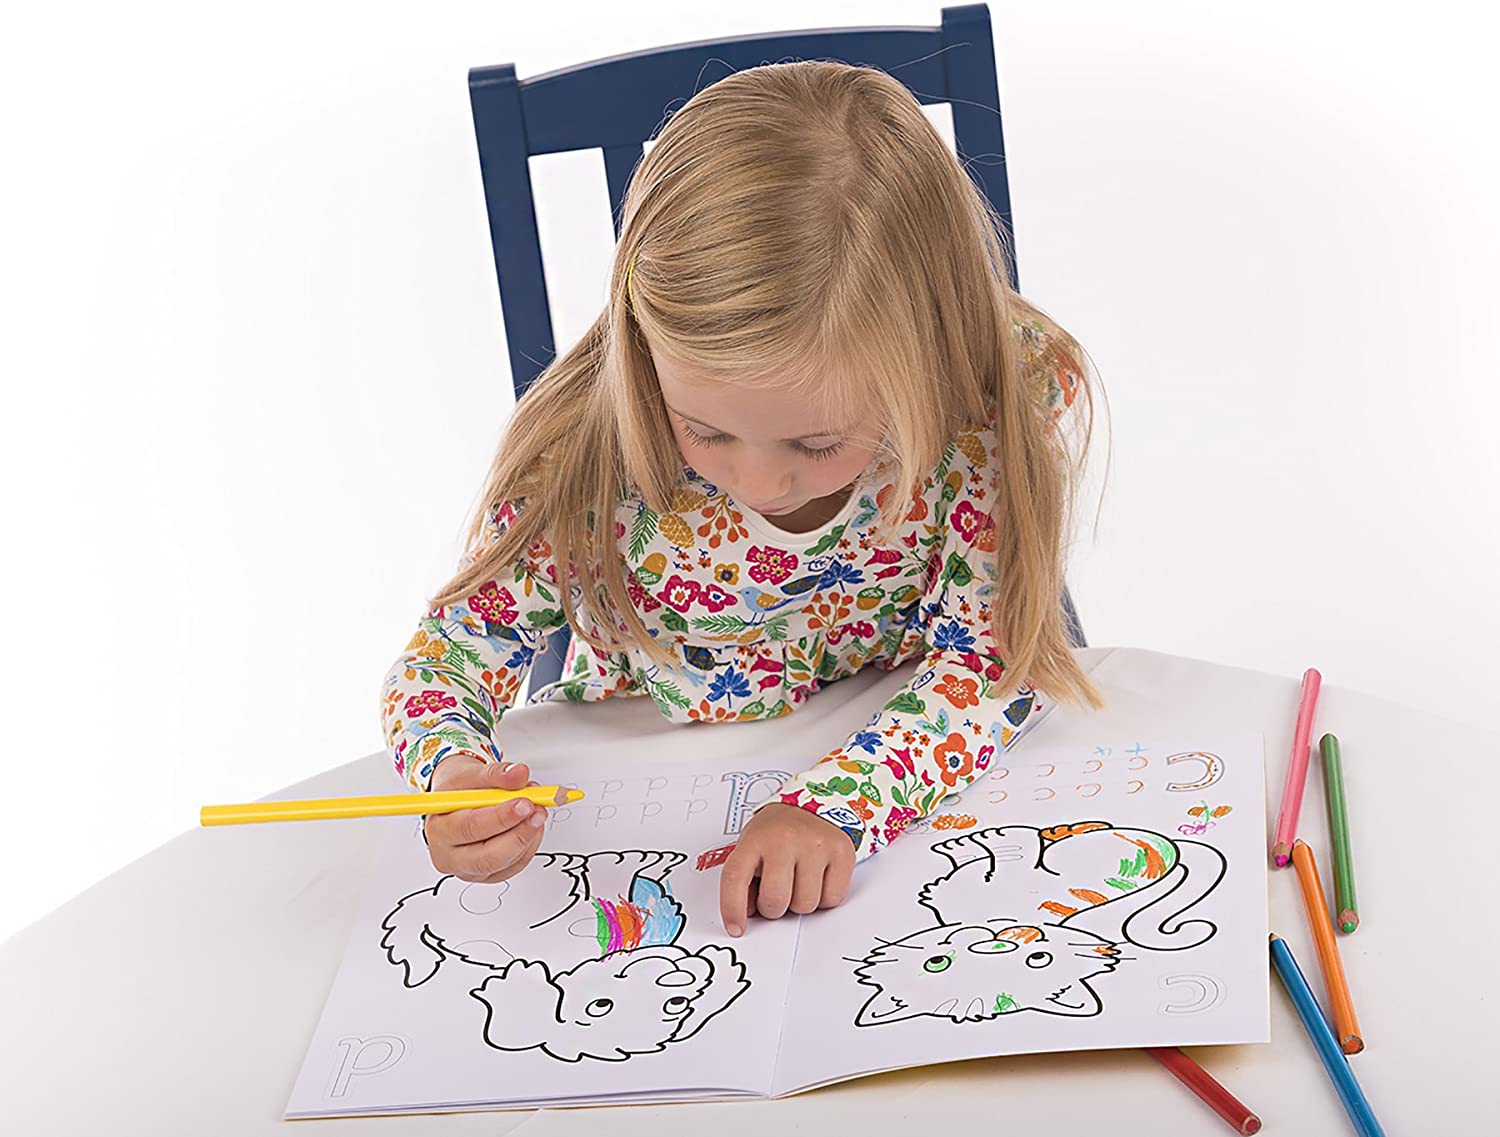 Orchard Toys CB02 ABC Colouring and Activity Book in use